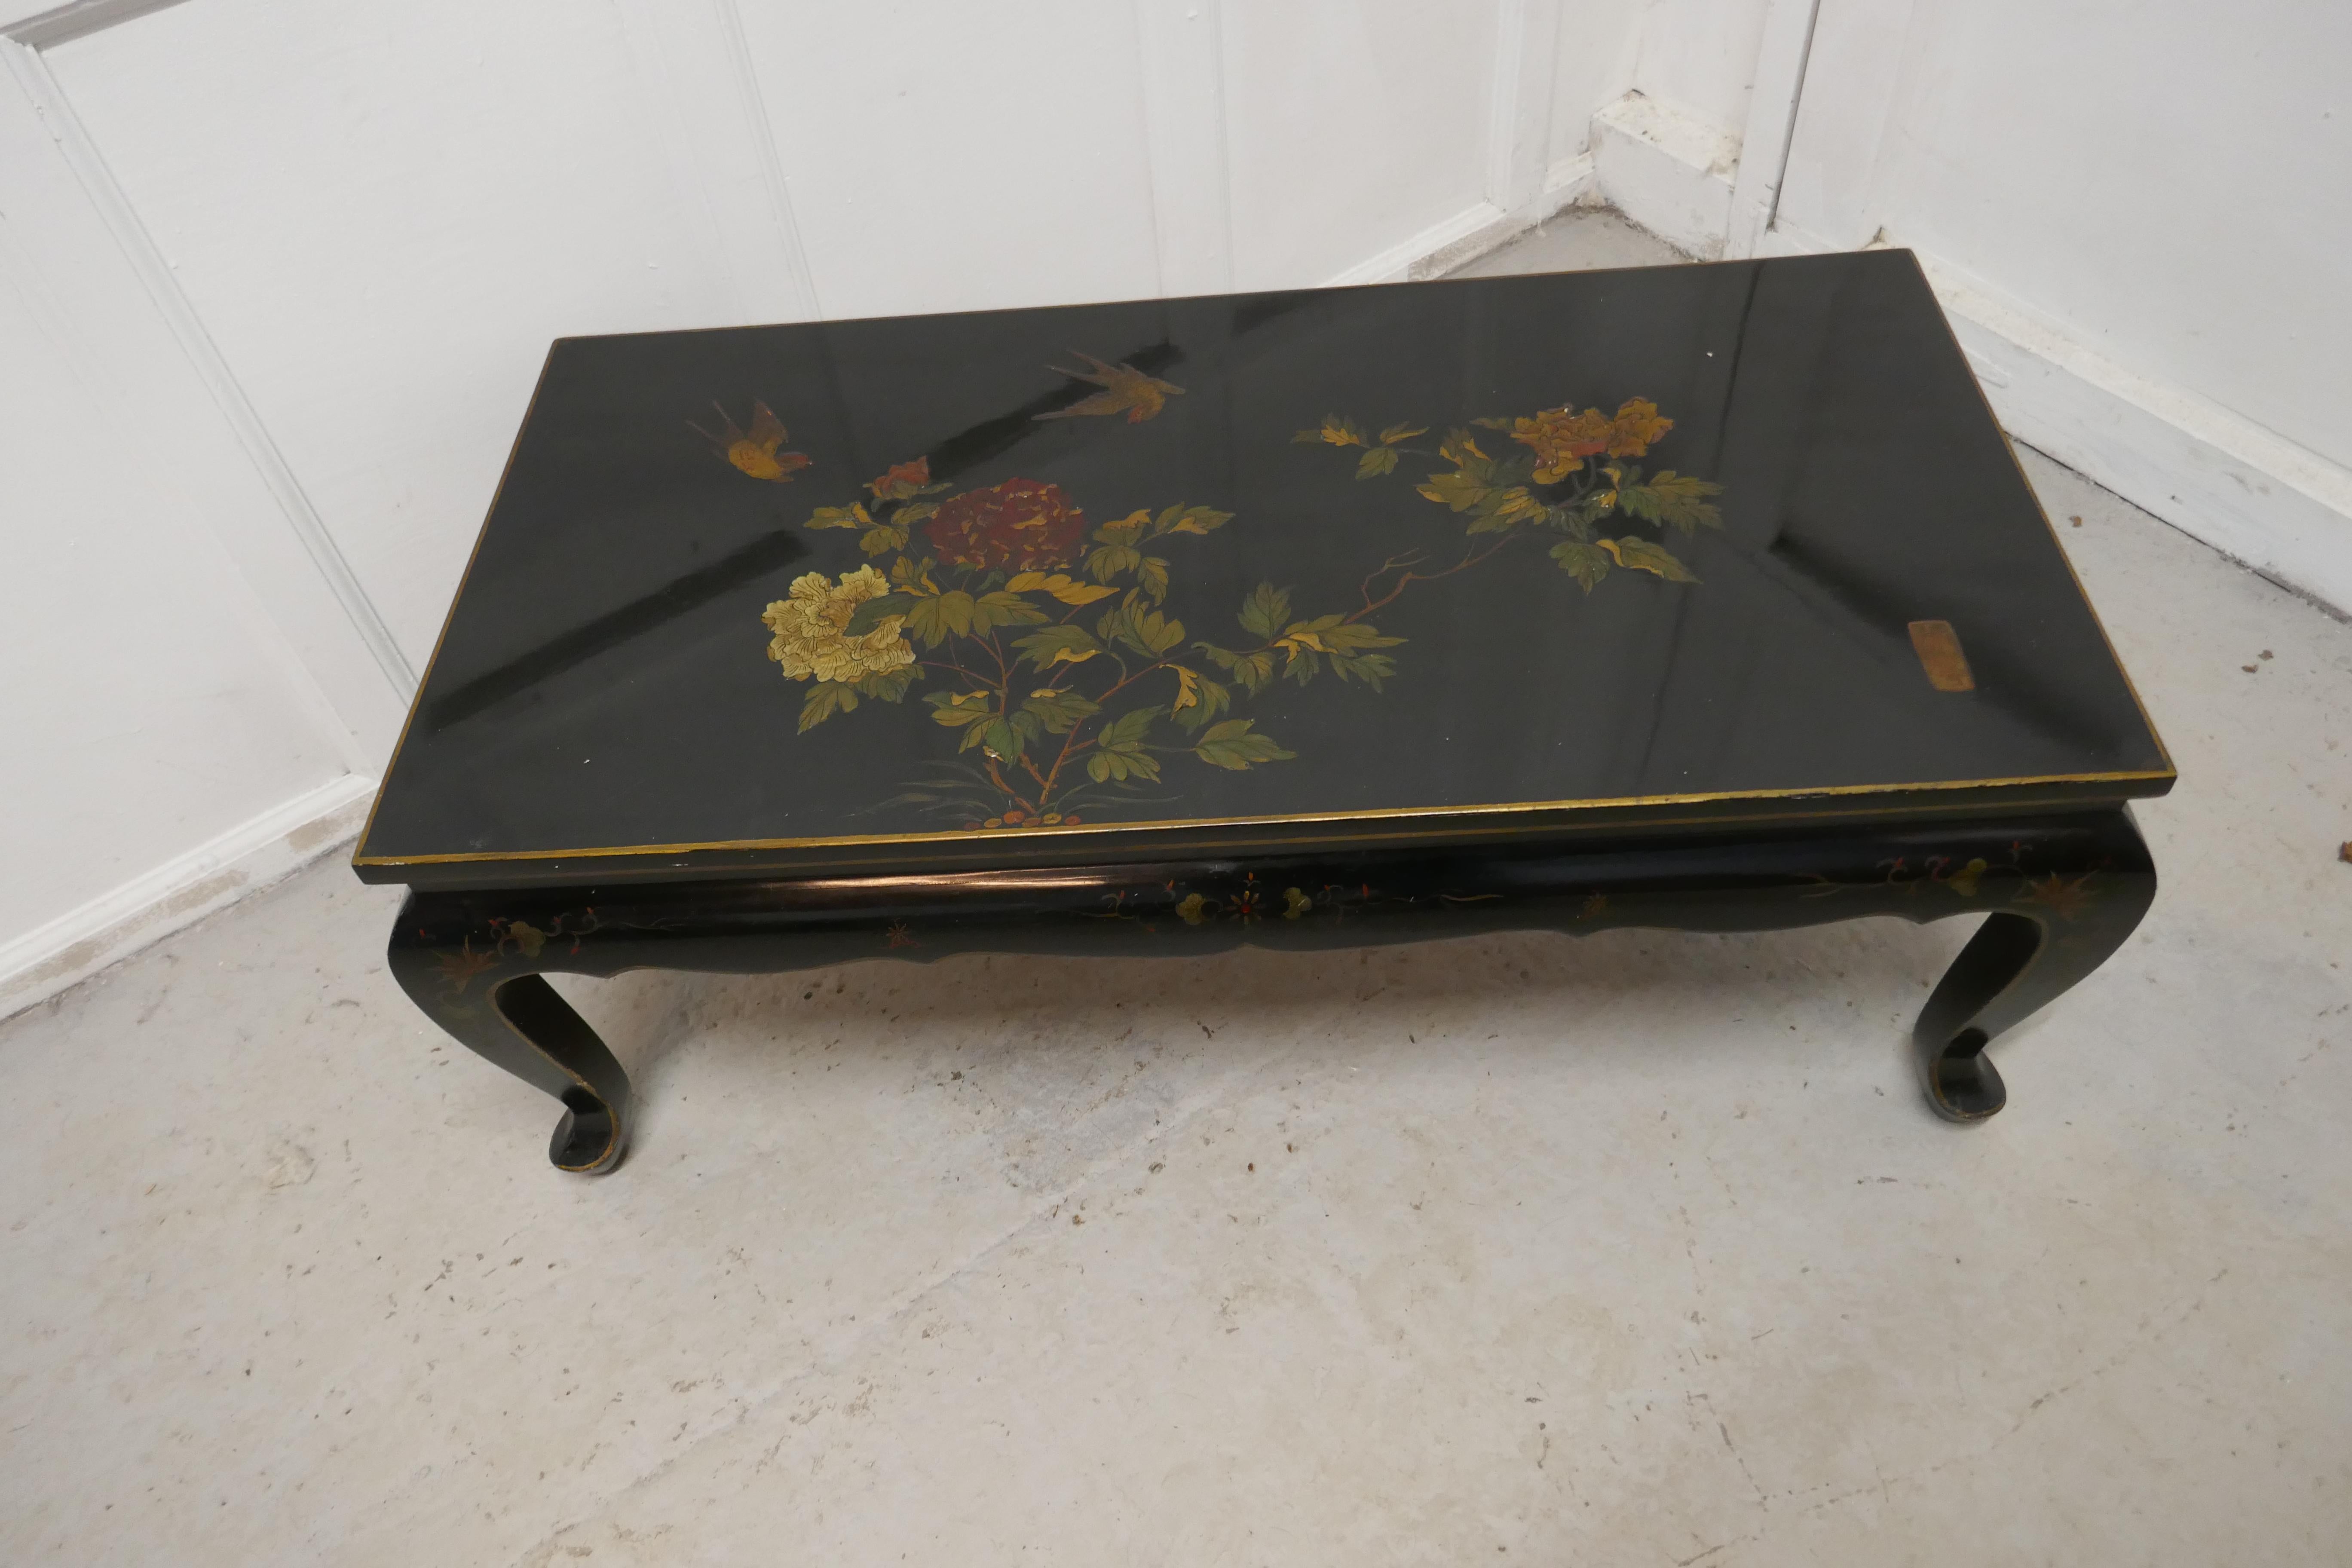 Painted and lacquered chinoiserie coffee table

This is an early 20th century piece, the table stands on cabriole legs in the Art Deco style with a shaped decorated apron below
The table is decorated with a black lacquer background and raised